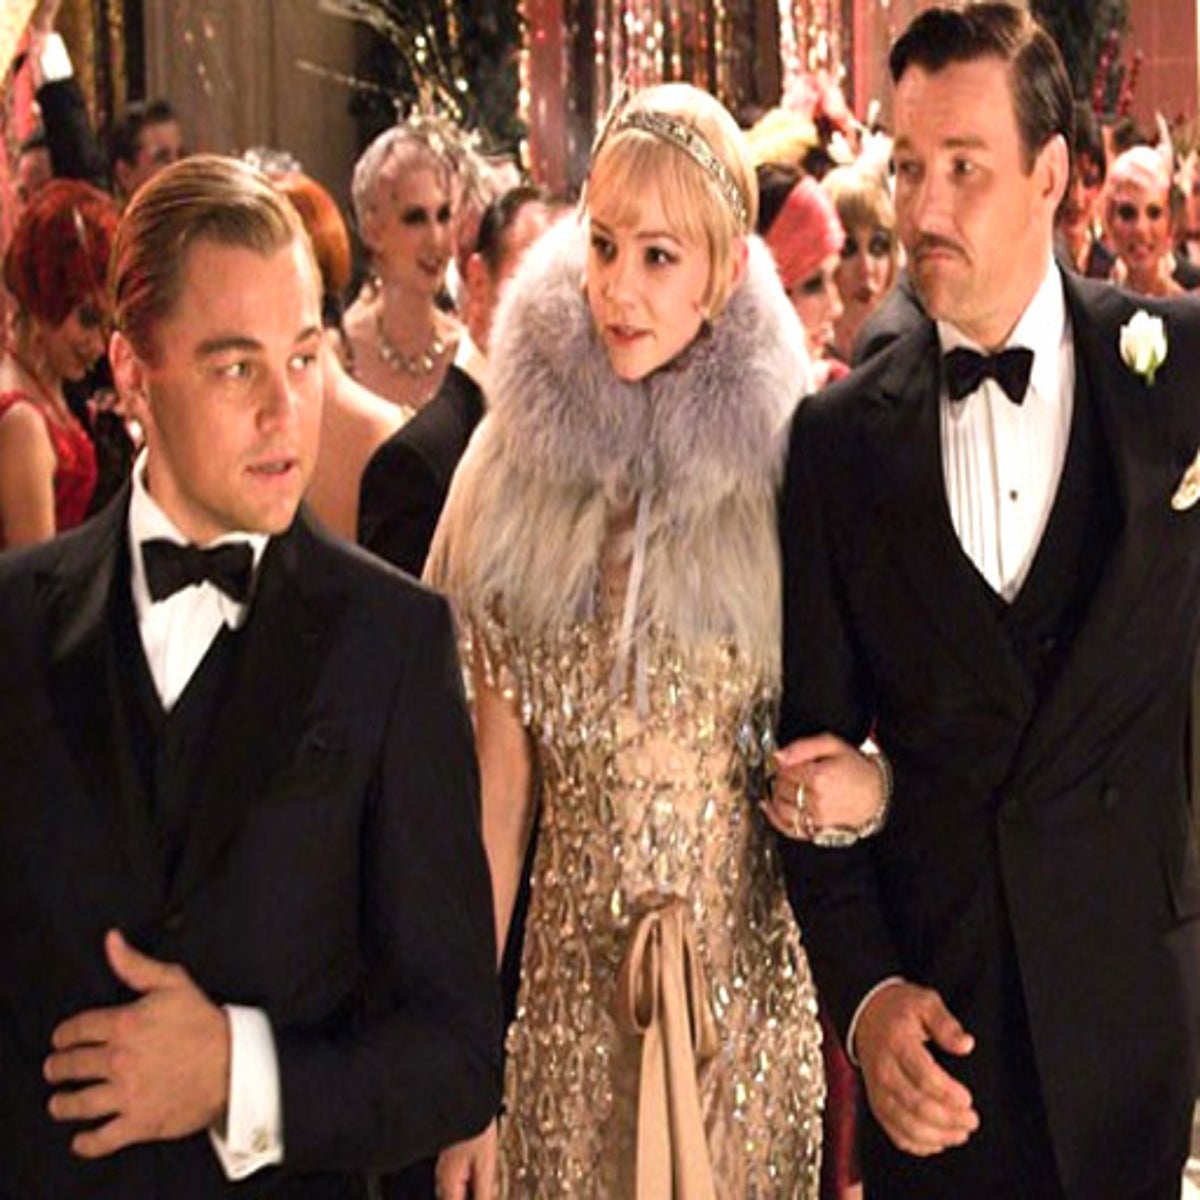 Mixed reviews for The Great Gatsby: a jaw-dropping evocation of the roaring  '20s or a flapper flop?, The Independent